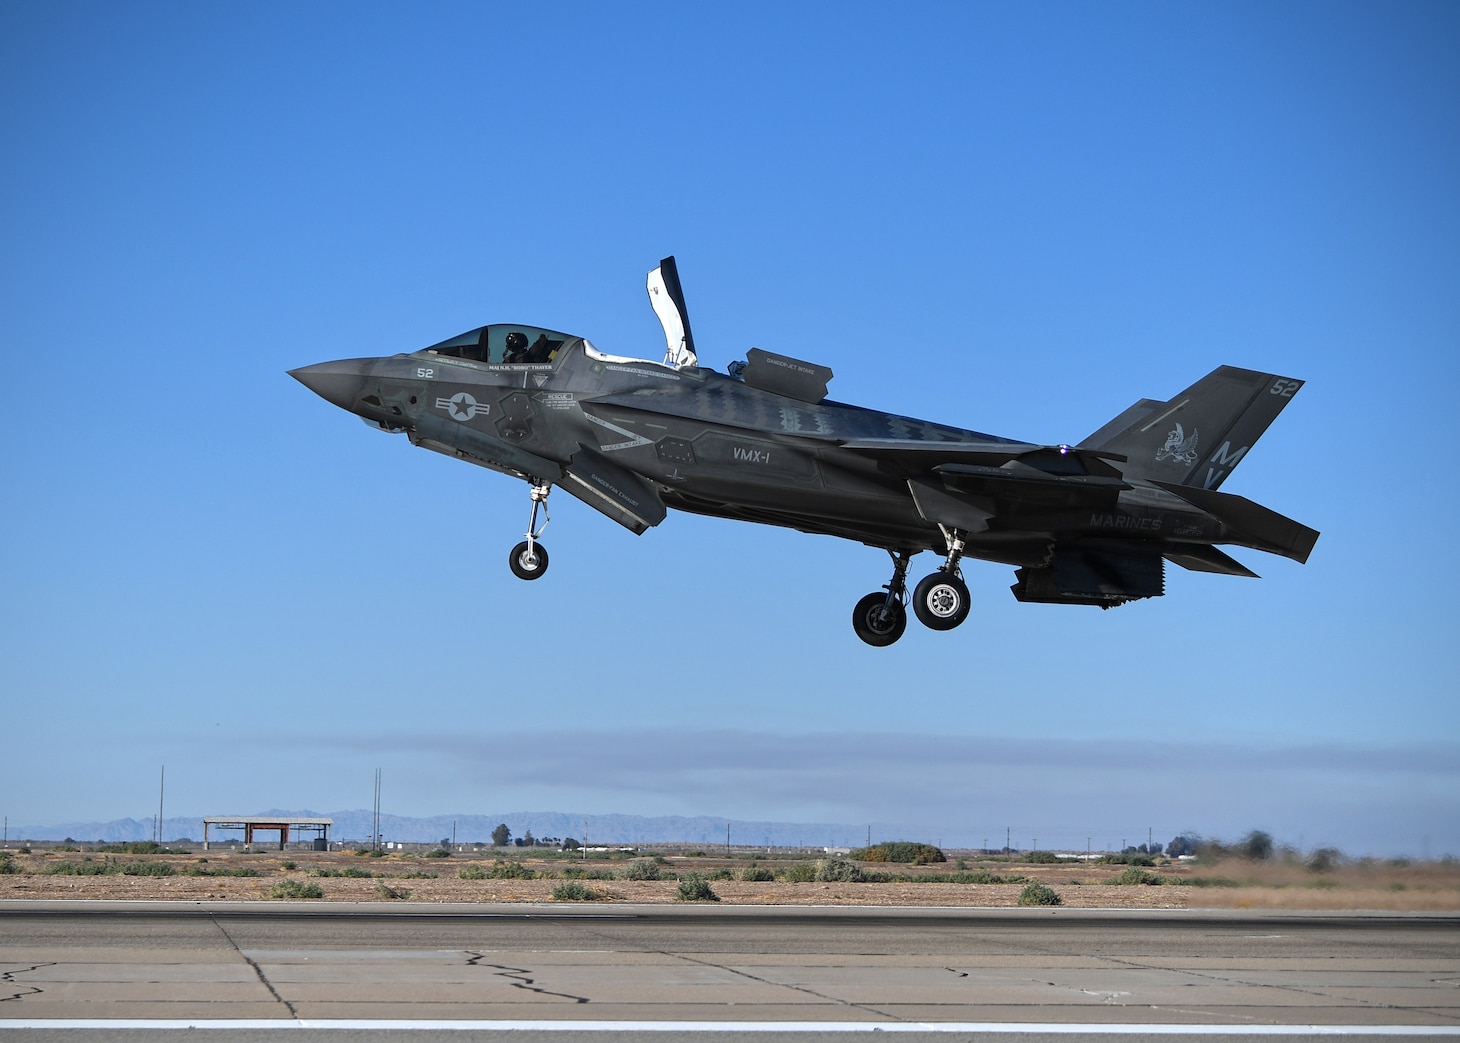 Marine Corps pilot, Maj. N.H. “Robo” Thayer conducts conventional landing of his F-35B Lightning II onboard Naval Air Facility (NAF) El Centro, Feb. 26, 2021. NAF El Centro supports joint service air combat training and readiness of the Warfighter. (U.S. Navy photo by Mass Communication Specialist 3rd Class Drew Verbis/Released) 210226-N-AS200-1429